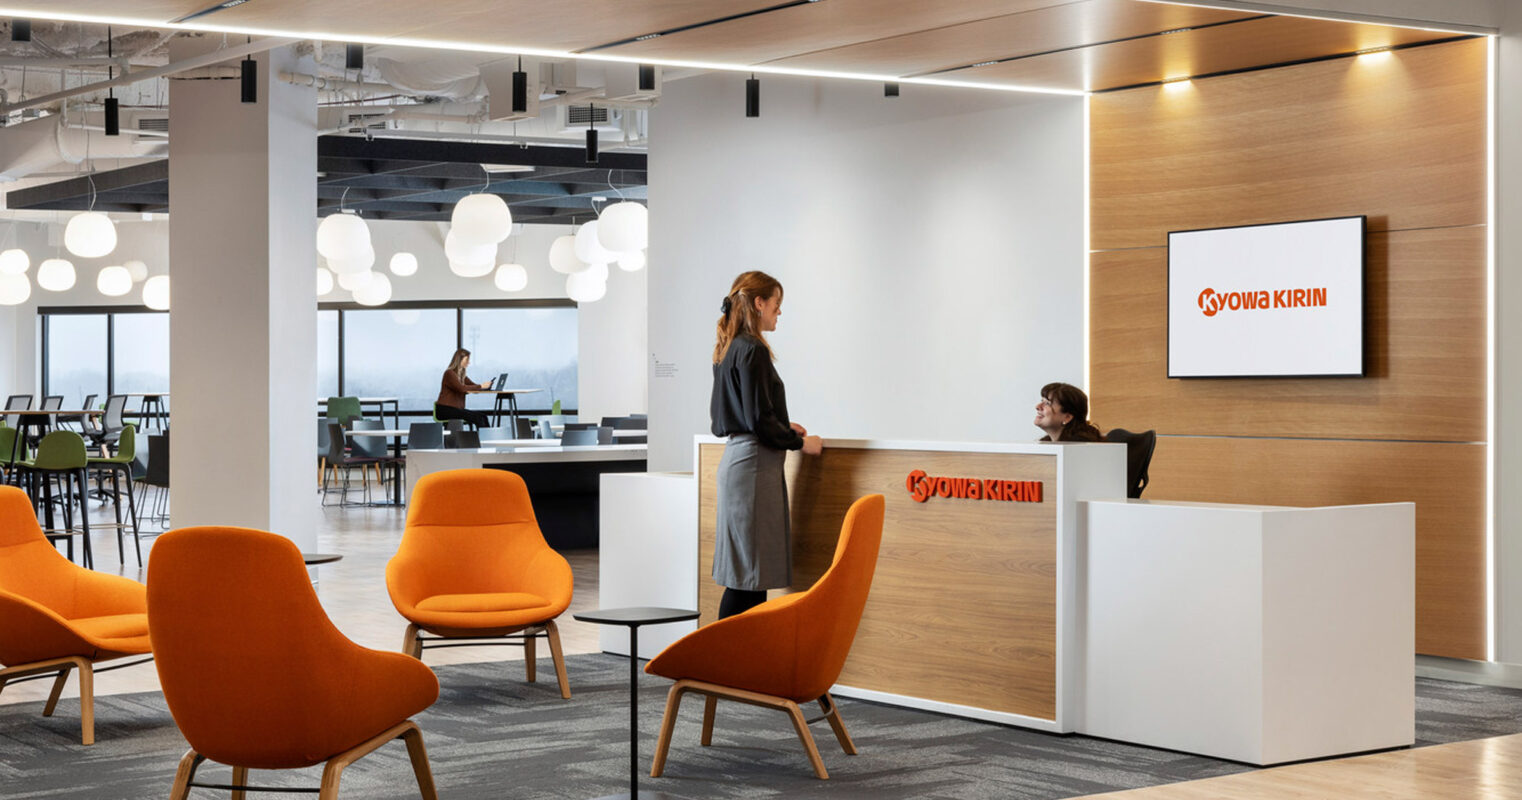 Modern office lobby featuring a sleek reception desk with a lit company sign, vibrant orange chairs adding a pop of color, and pendant lighting illuminating the open, airy space.